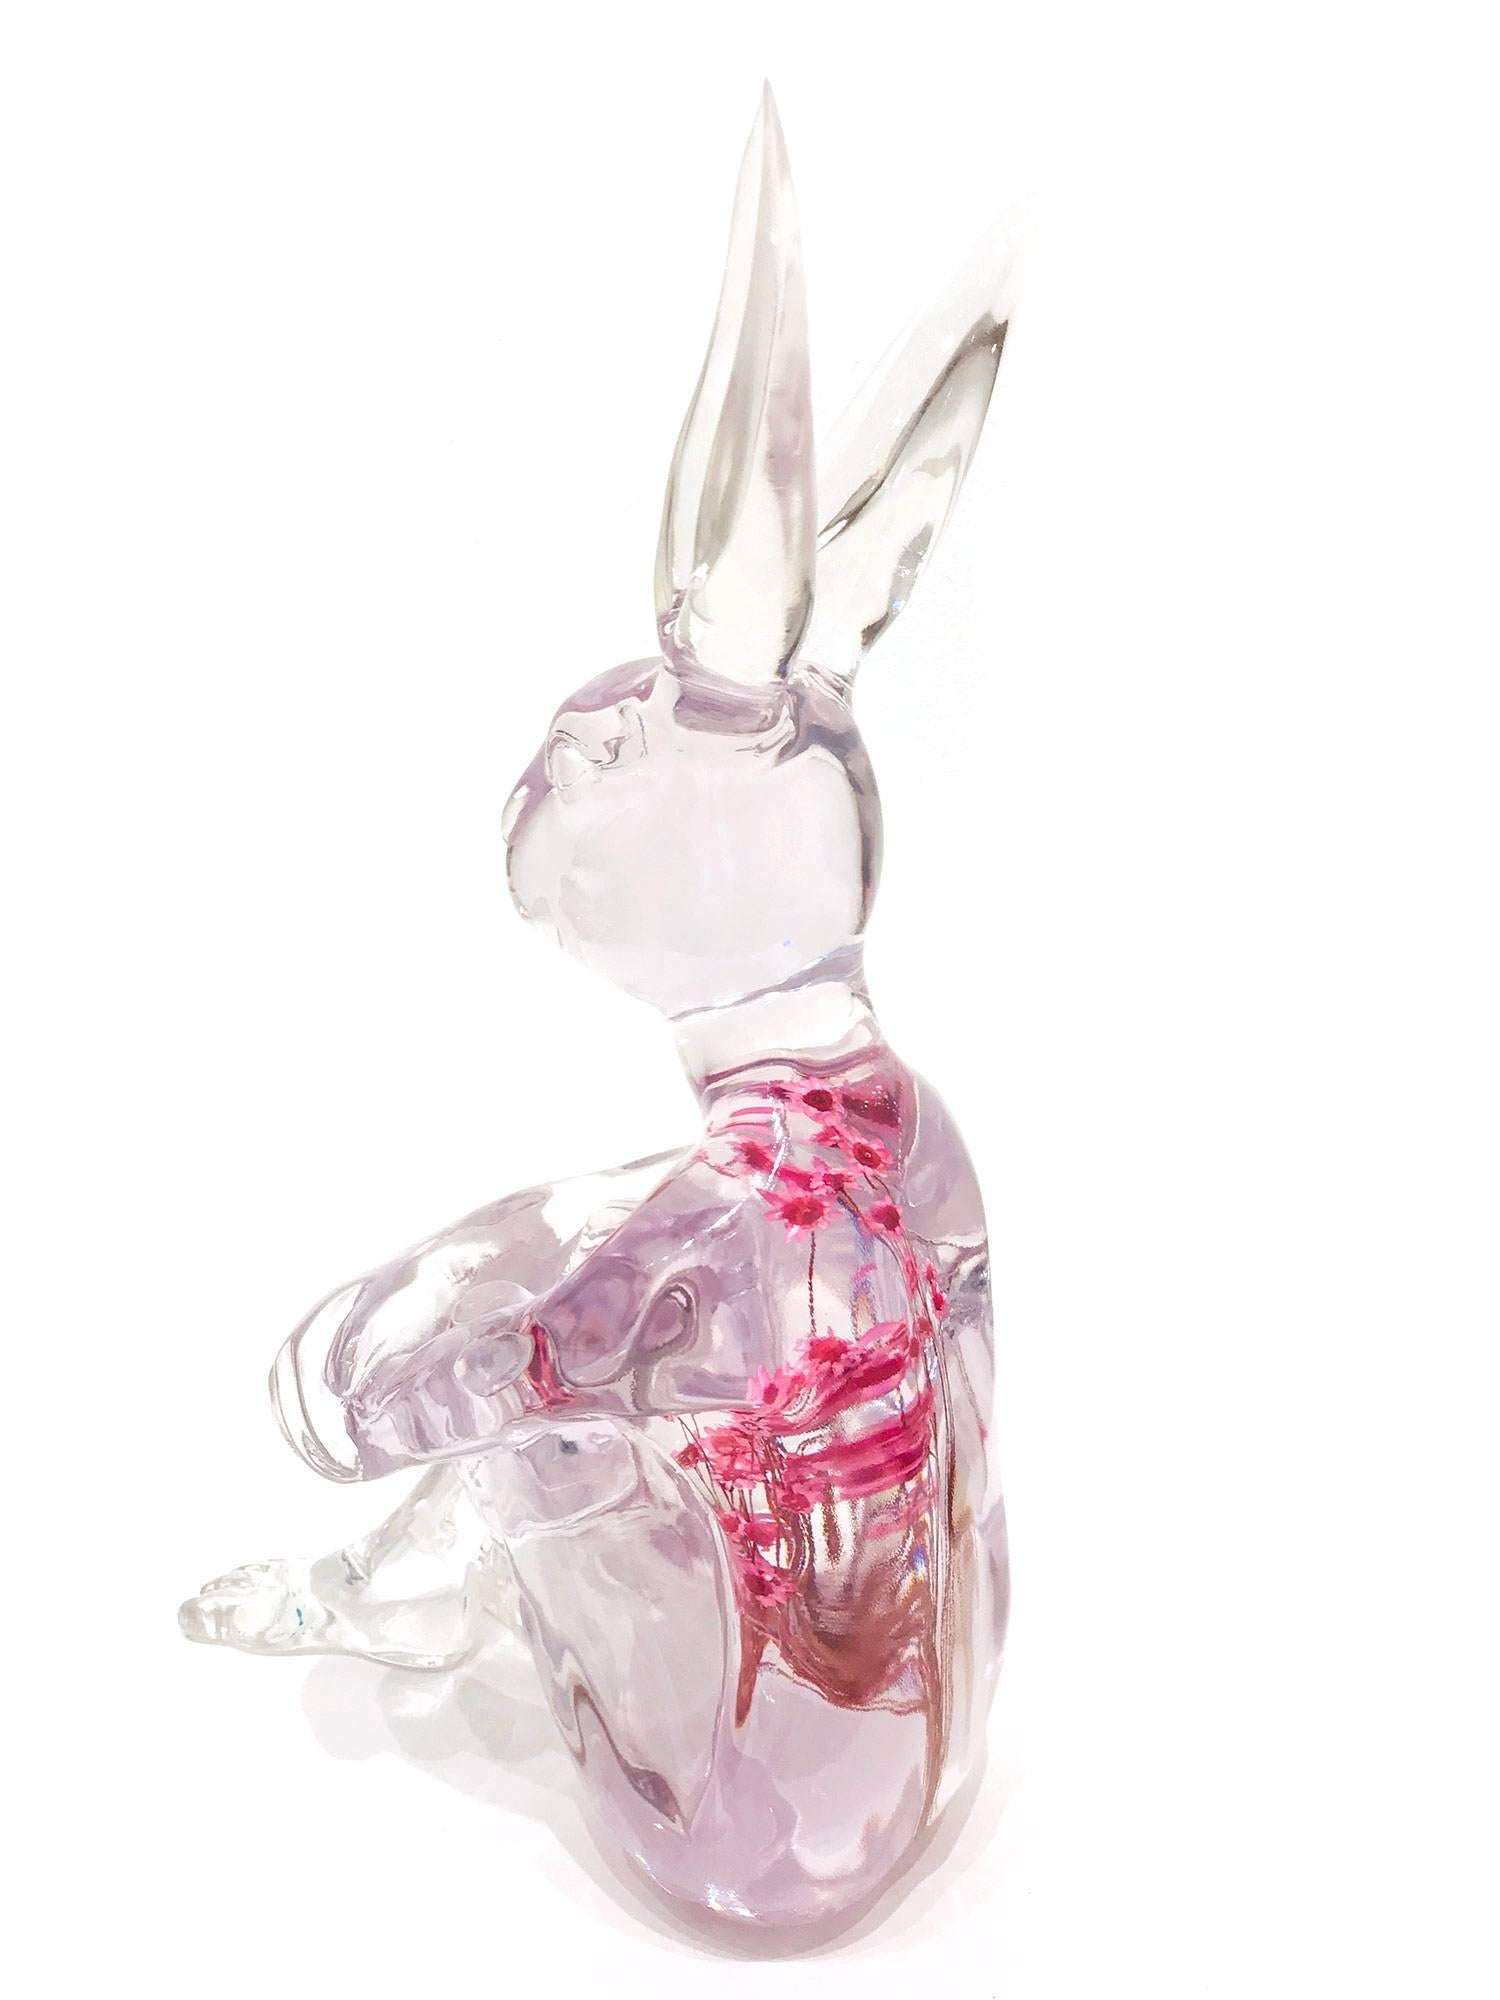 A whimsical yet very strong piece depicting the Rabbit from Gillie and Marc's iconic figures of the Dog/Bunny Human Hybrid, which has picked up much esteem across the globe. Here we find Rabbit sitting crossed legged and with beautiful pink flowers